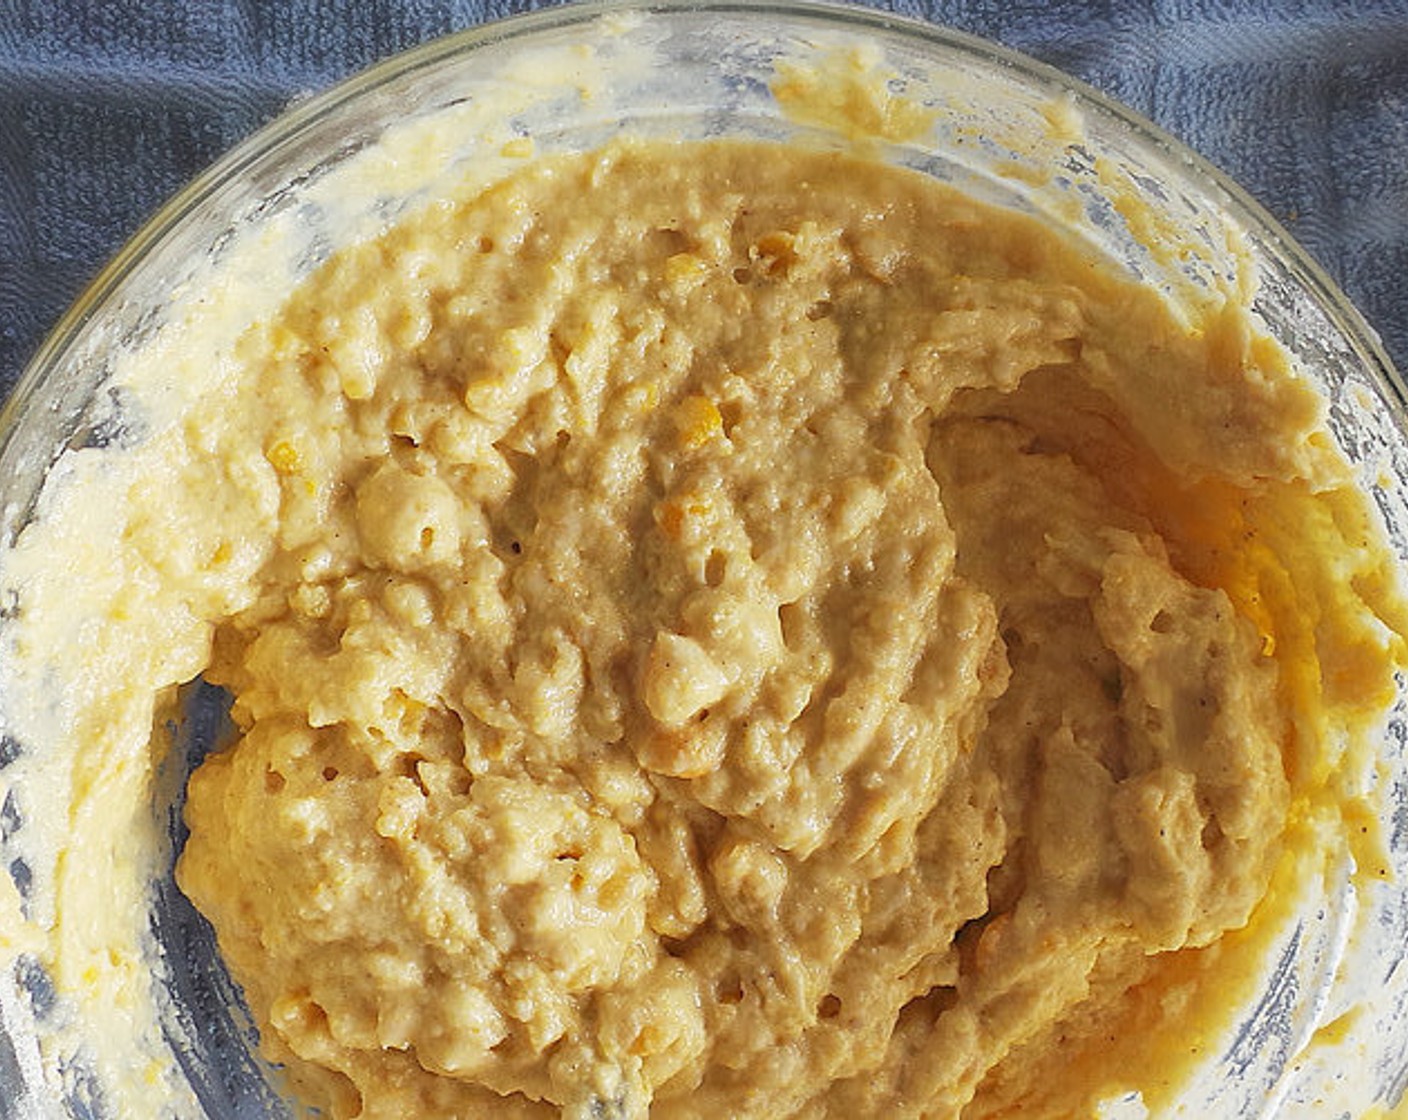 step 3 In a seperate bowl, combine Eggs (3), Creamed Corn (1 can), and Fat-Free Greek Yogurt (3/4 cup) until combined. Add the wet into the dry and gently mix until batter forms.